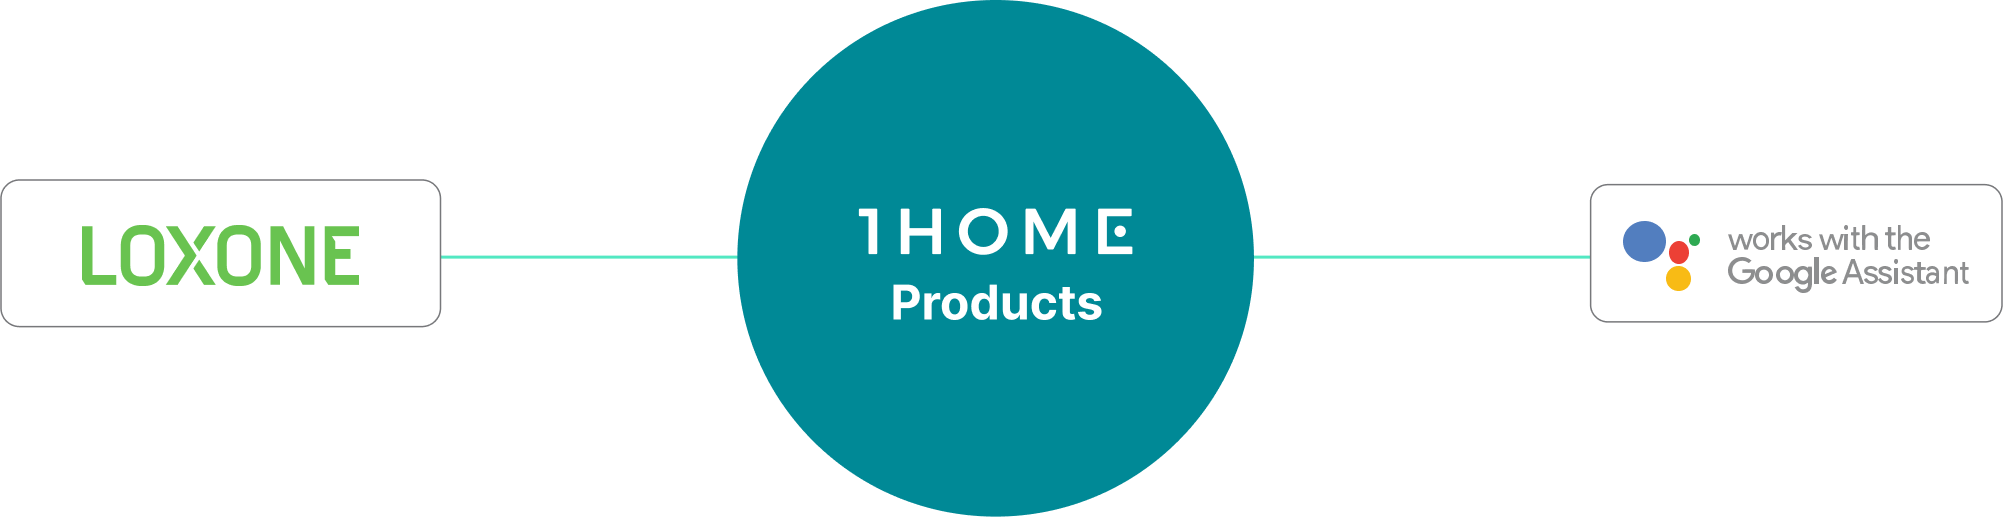 Google Home to Loxone connection made simple with 1Home